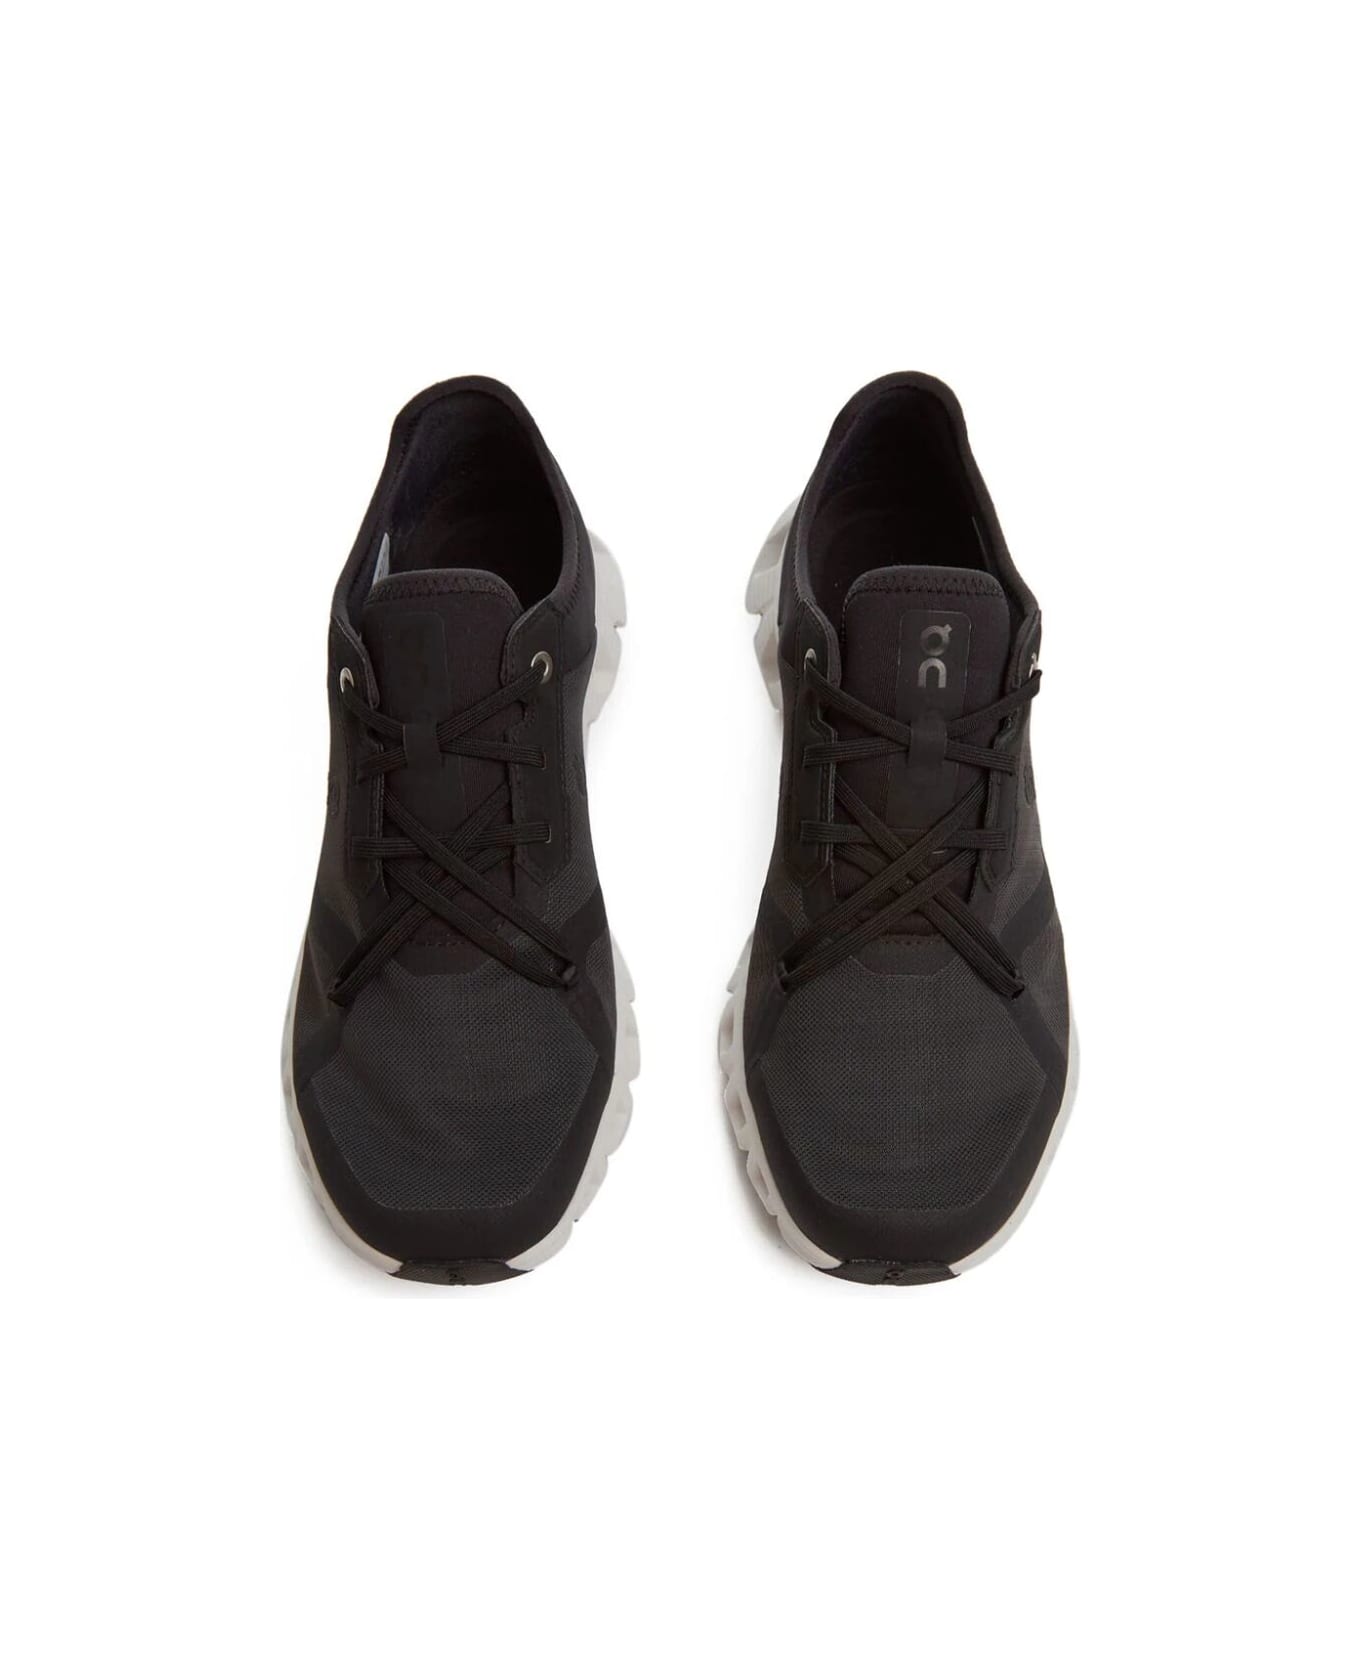 ON Cloud X 3 Ad Sneakers - Black White